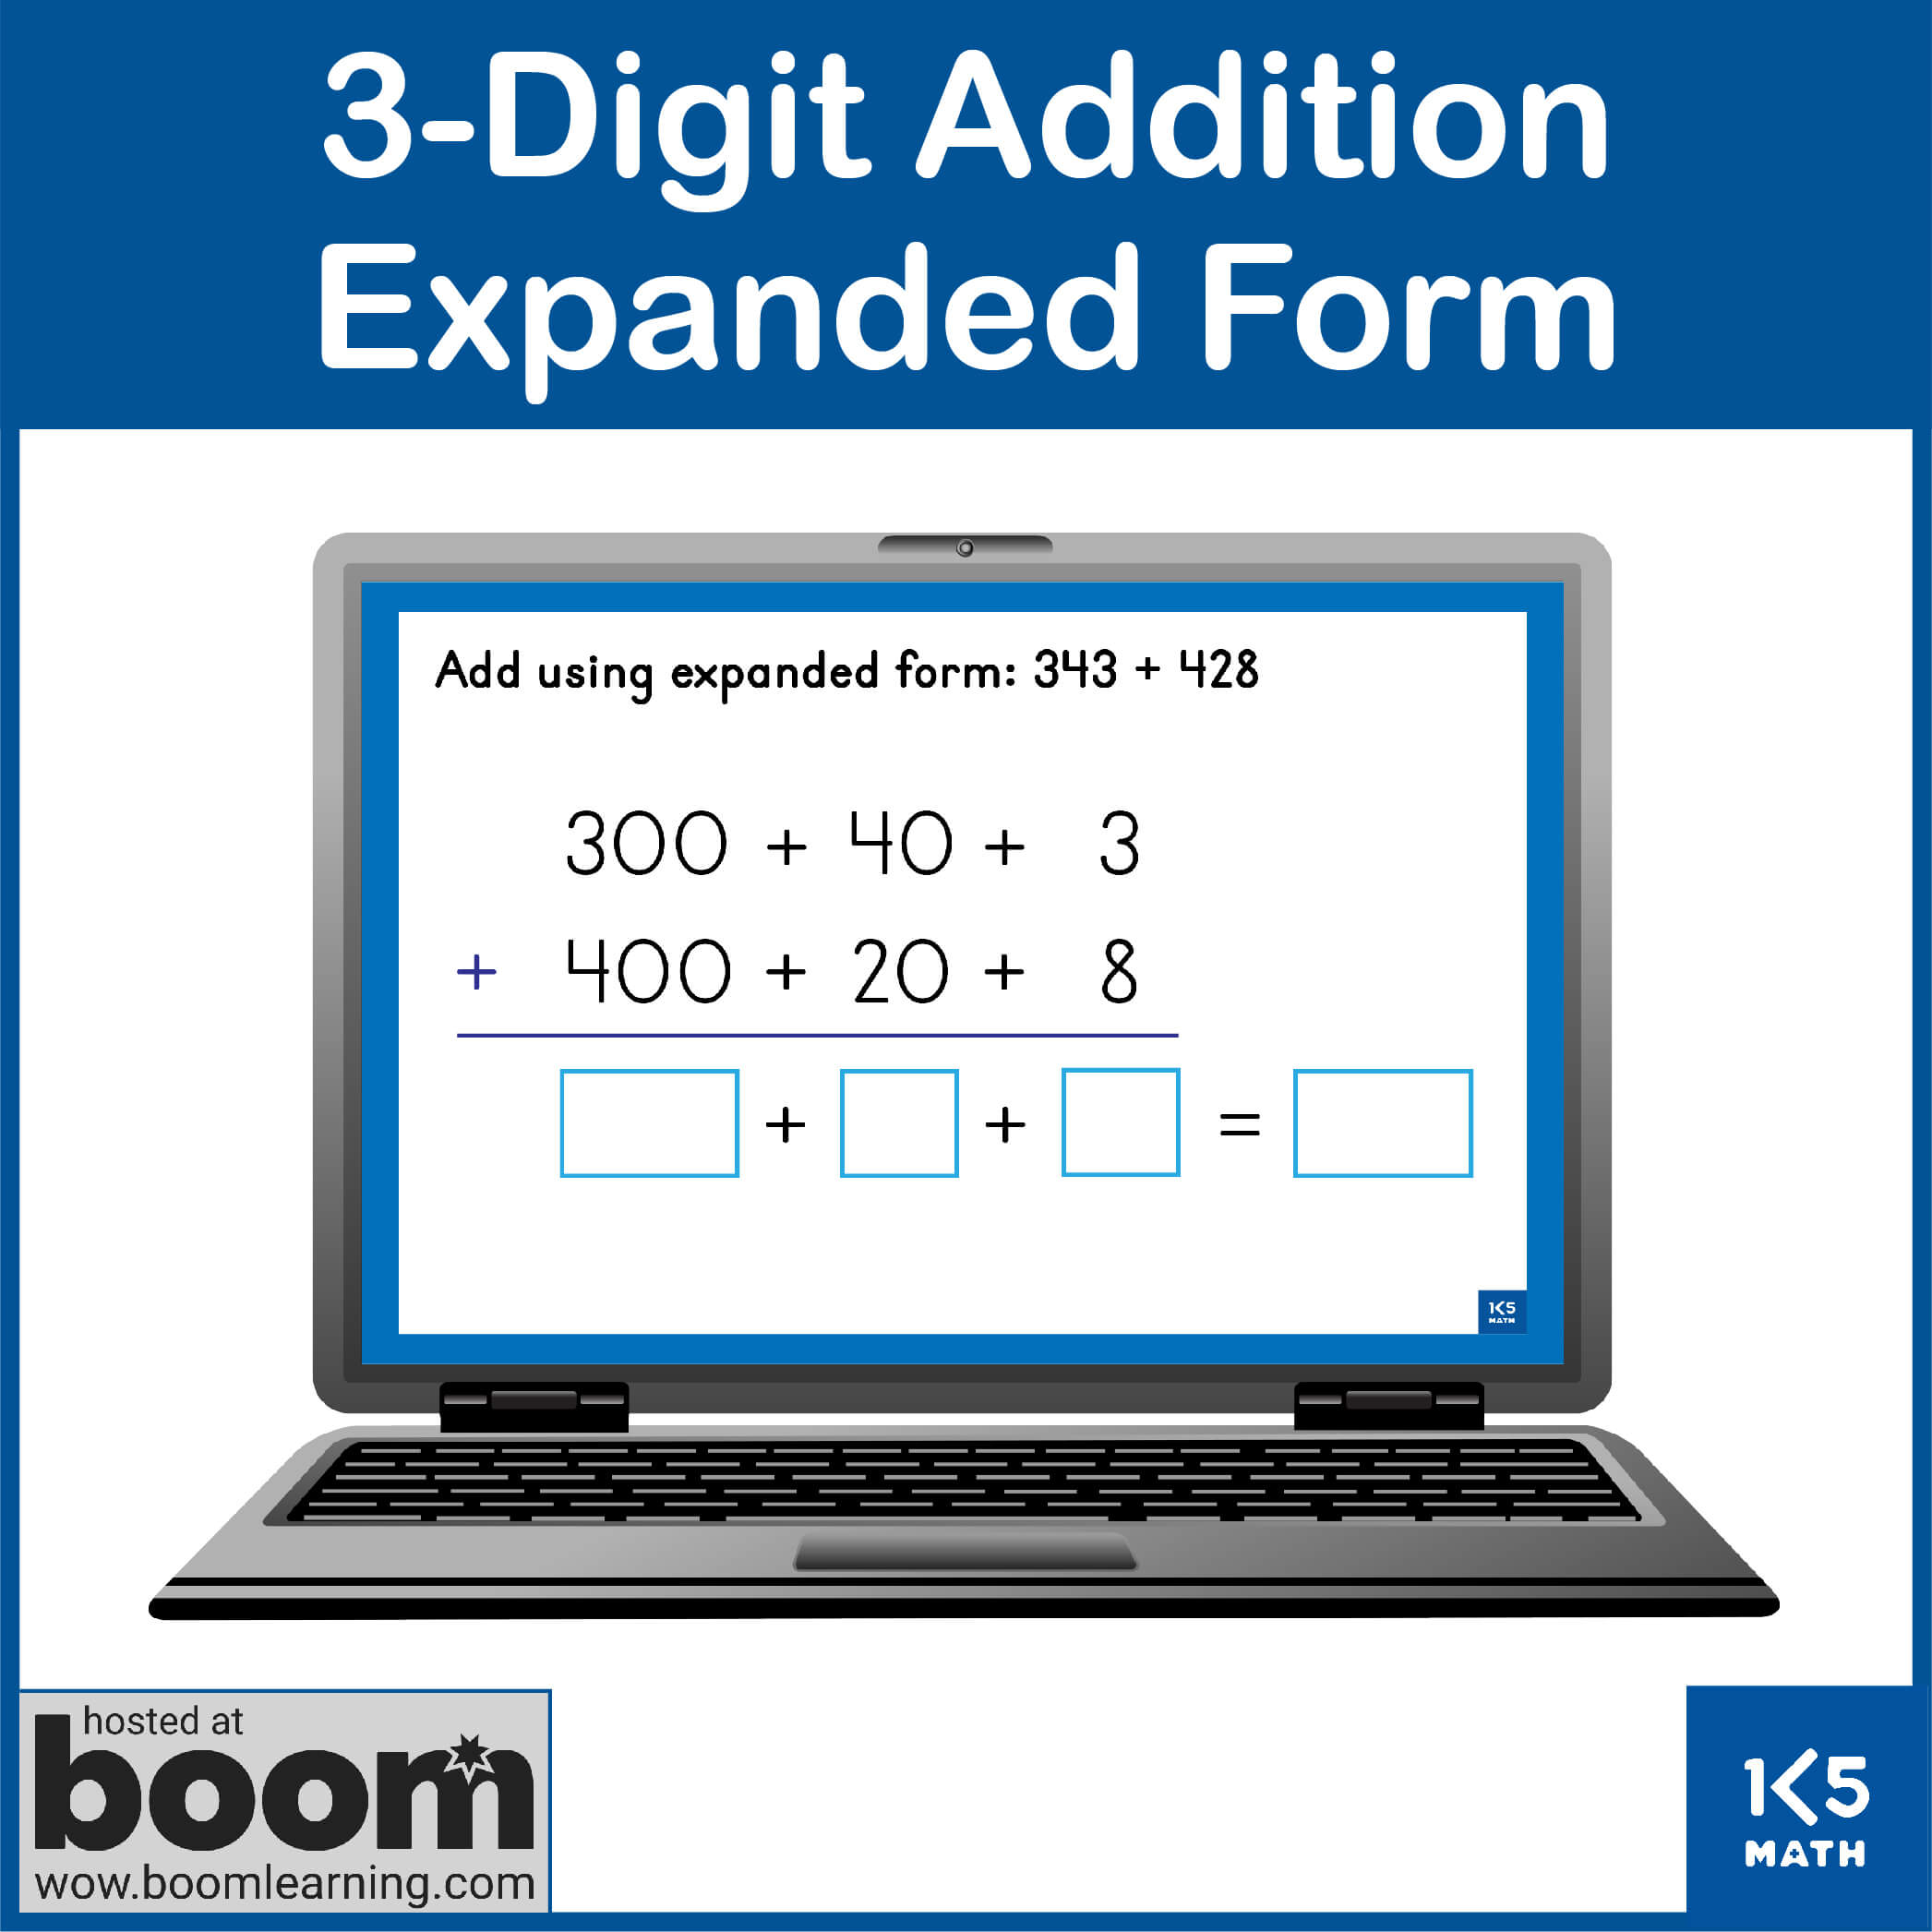 Boom Cards: 3-Digit Addition Expanded Form